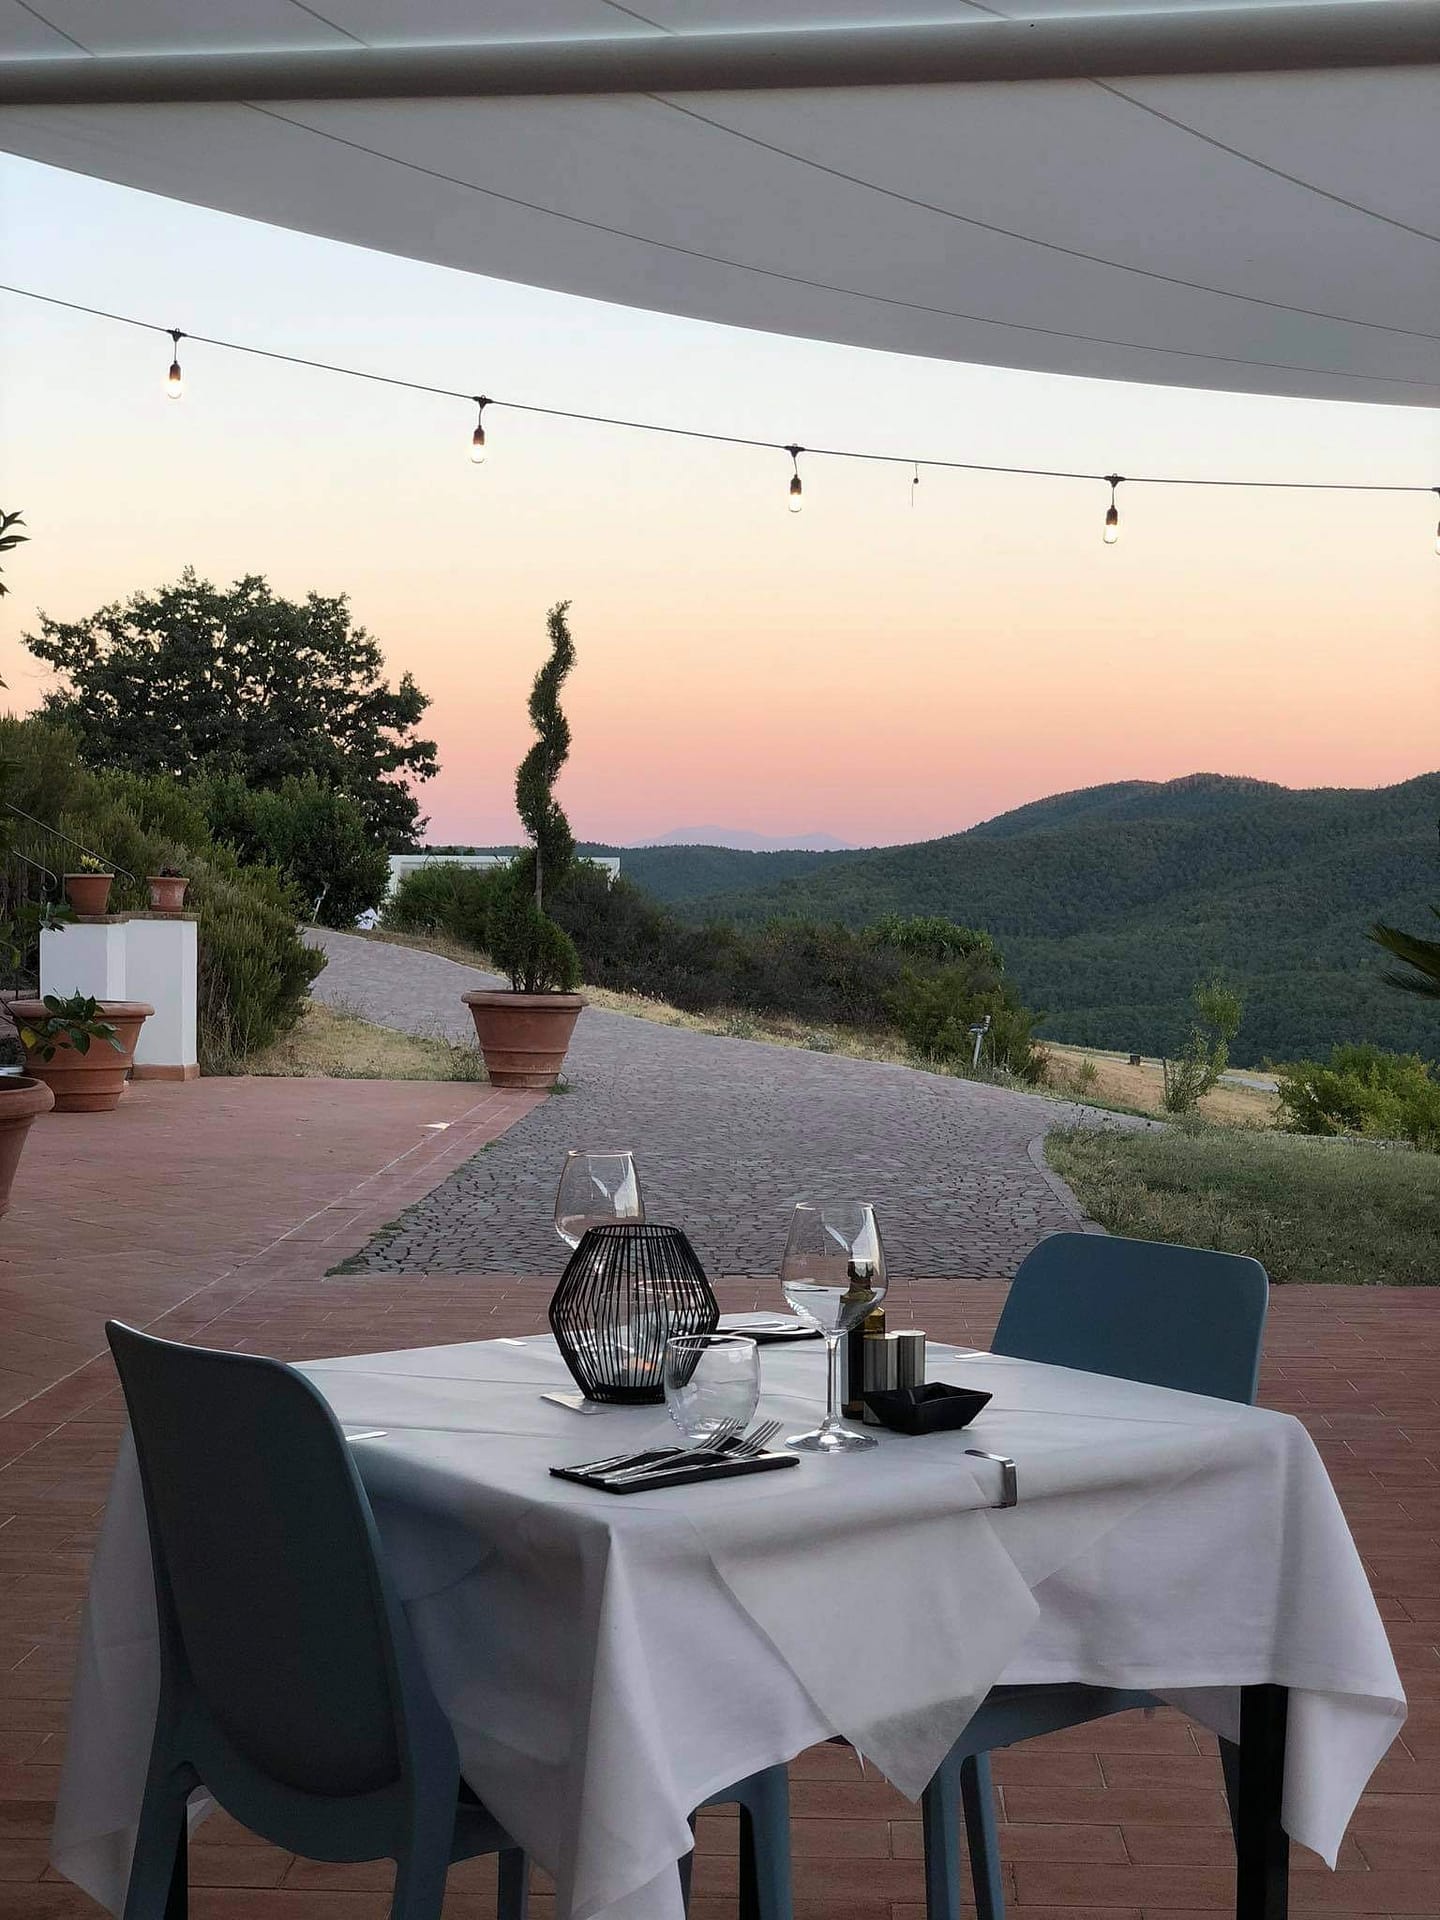 Dinner with a view at Heima Ristorante in VIN Hotel - Wine Hotel Tuscany